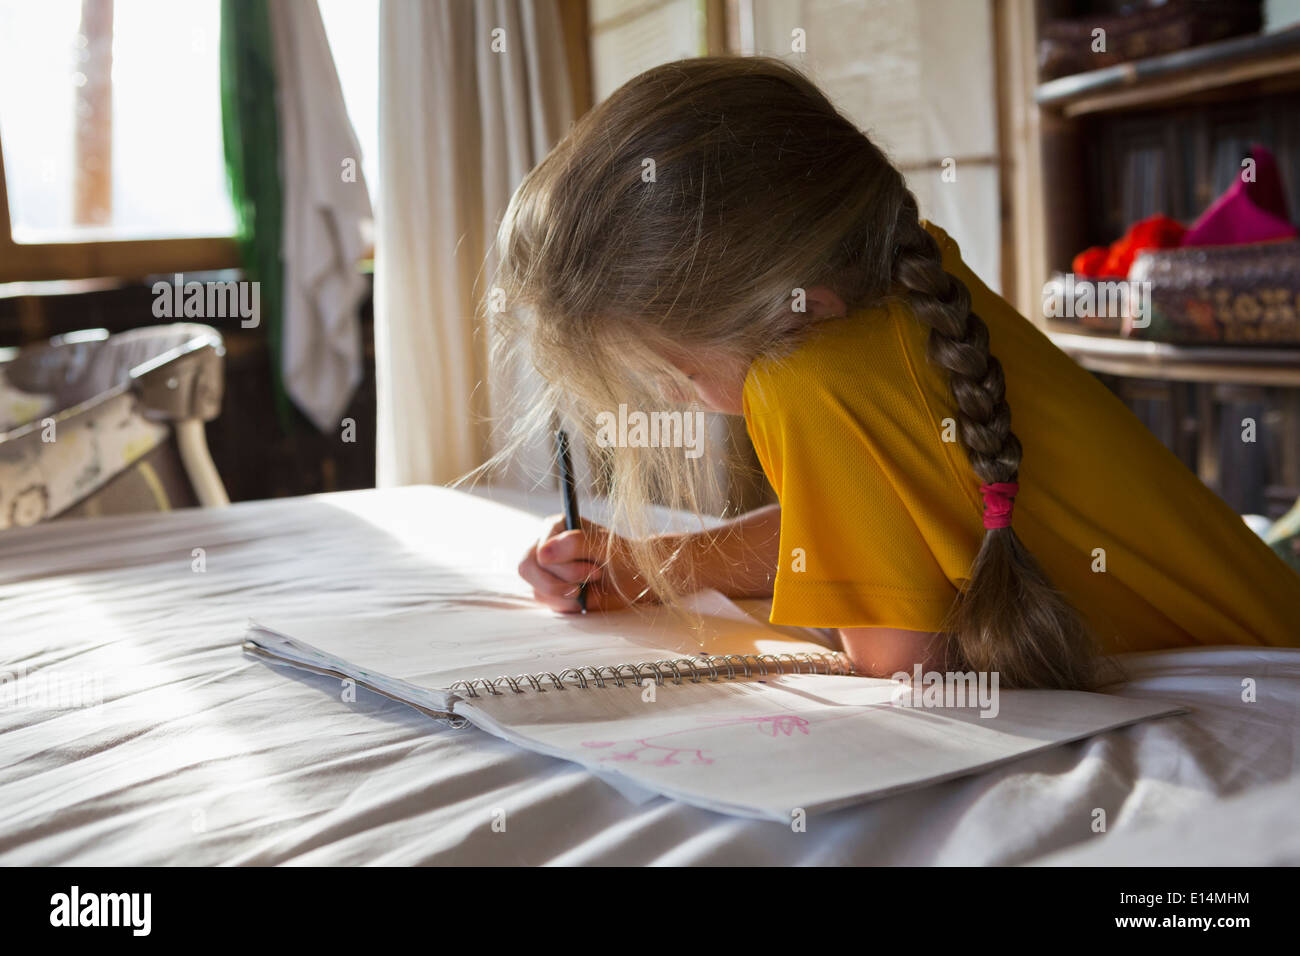 Caucasian girl drawing in notebook on bed Stock Photo